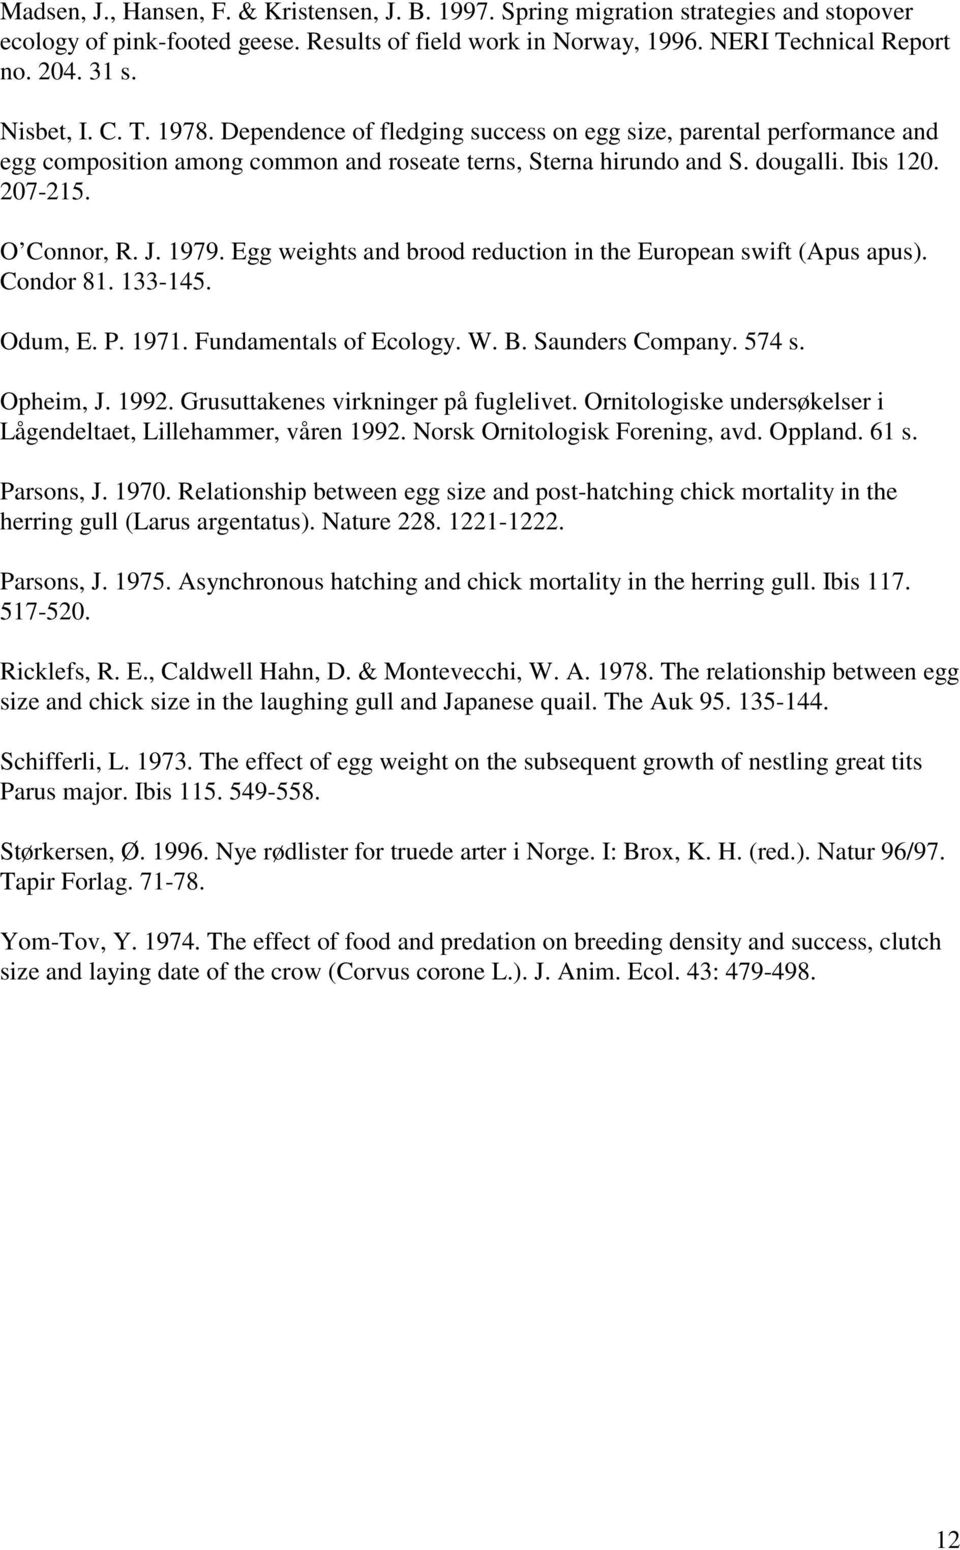 O Connor, R. J. 1979. Egg weights and brood reduction in the European swift (Apus apus). Condor 81. 133-145. Odum, E. P. 1971. Fundamentals of Ecology. W. B. Saunders Company. 574 s. Opheim, J. 1992.